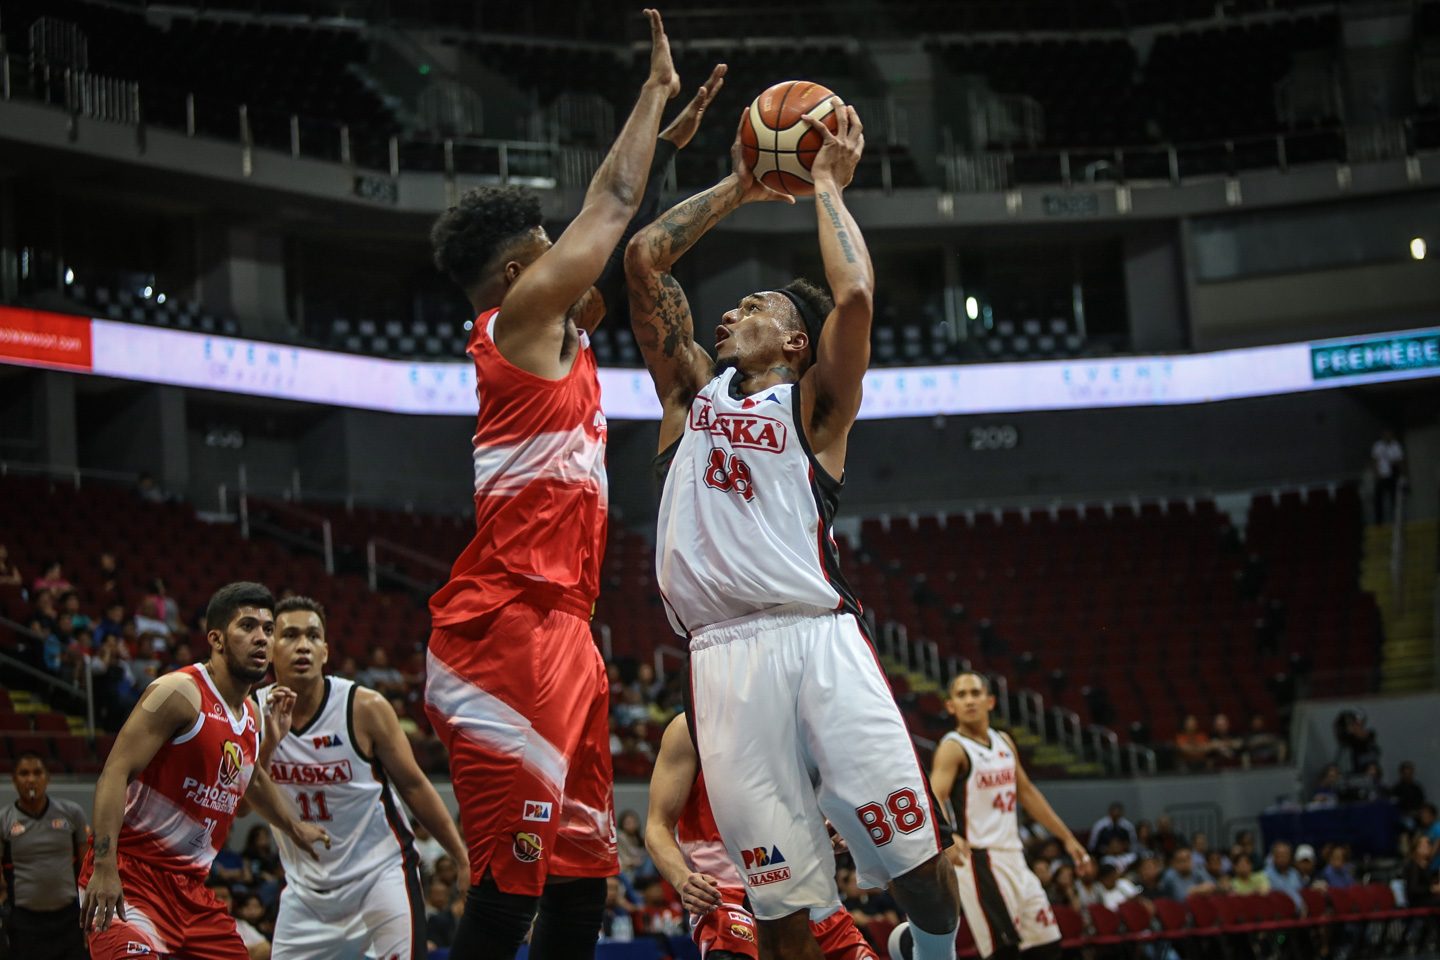 Abueva changes jersey number to signal transformation to Beast 2.0